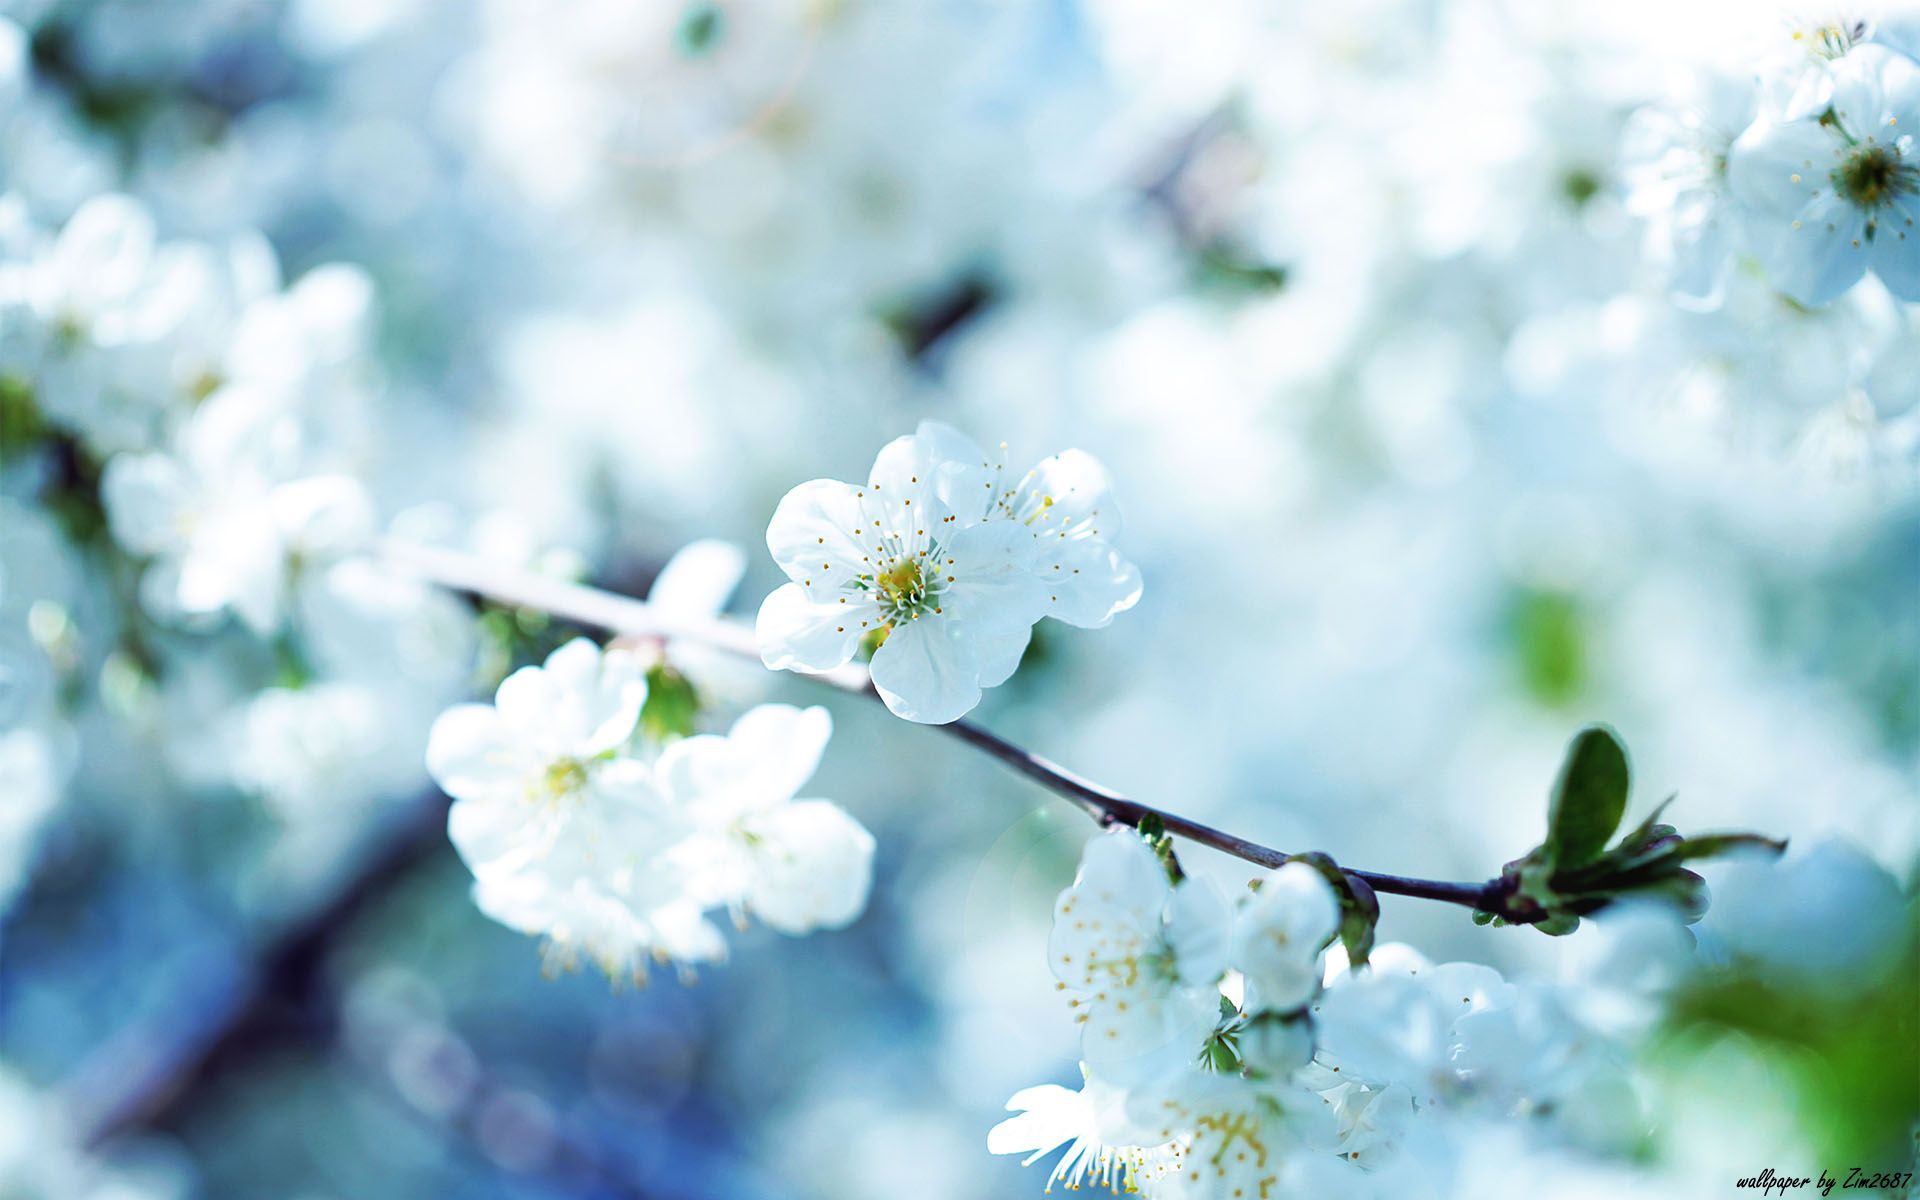 Realistic Flower Wallpapers